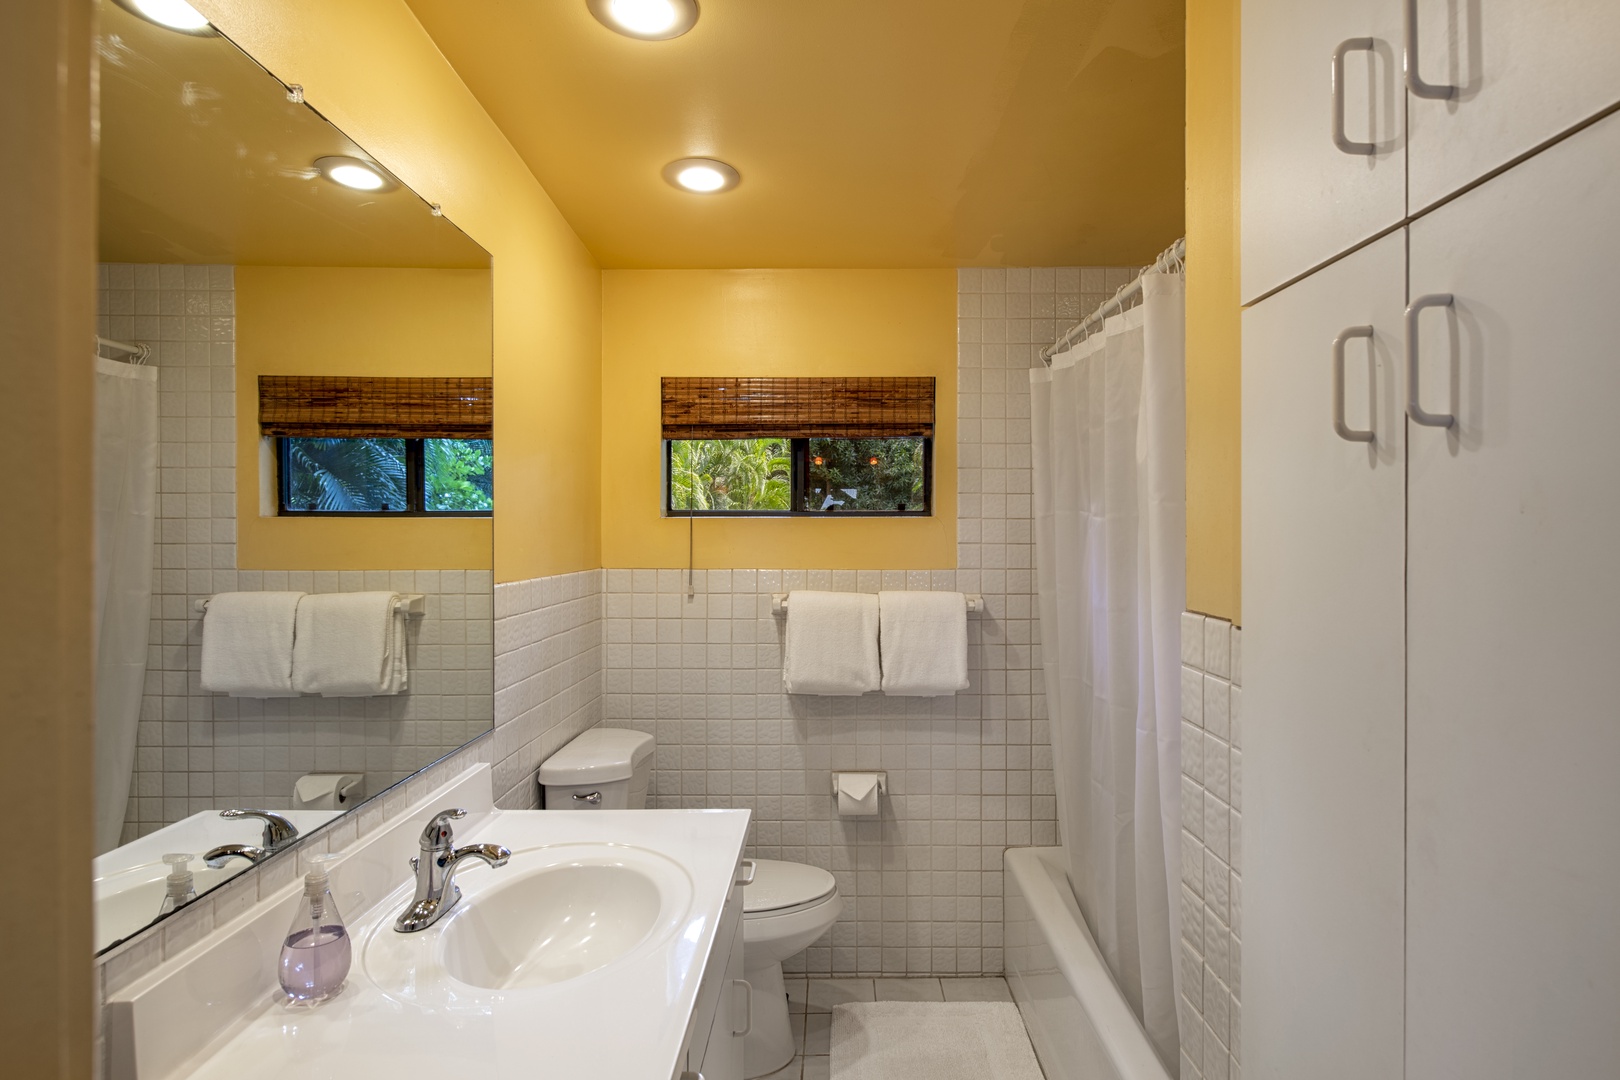 Kamuela Vacation Rentals, Hui Pu - Ohana En-suite. Please note, the interior of this home is undergoing an extensive remodel.